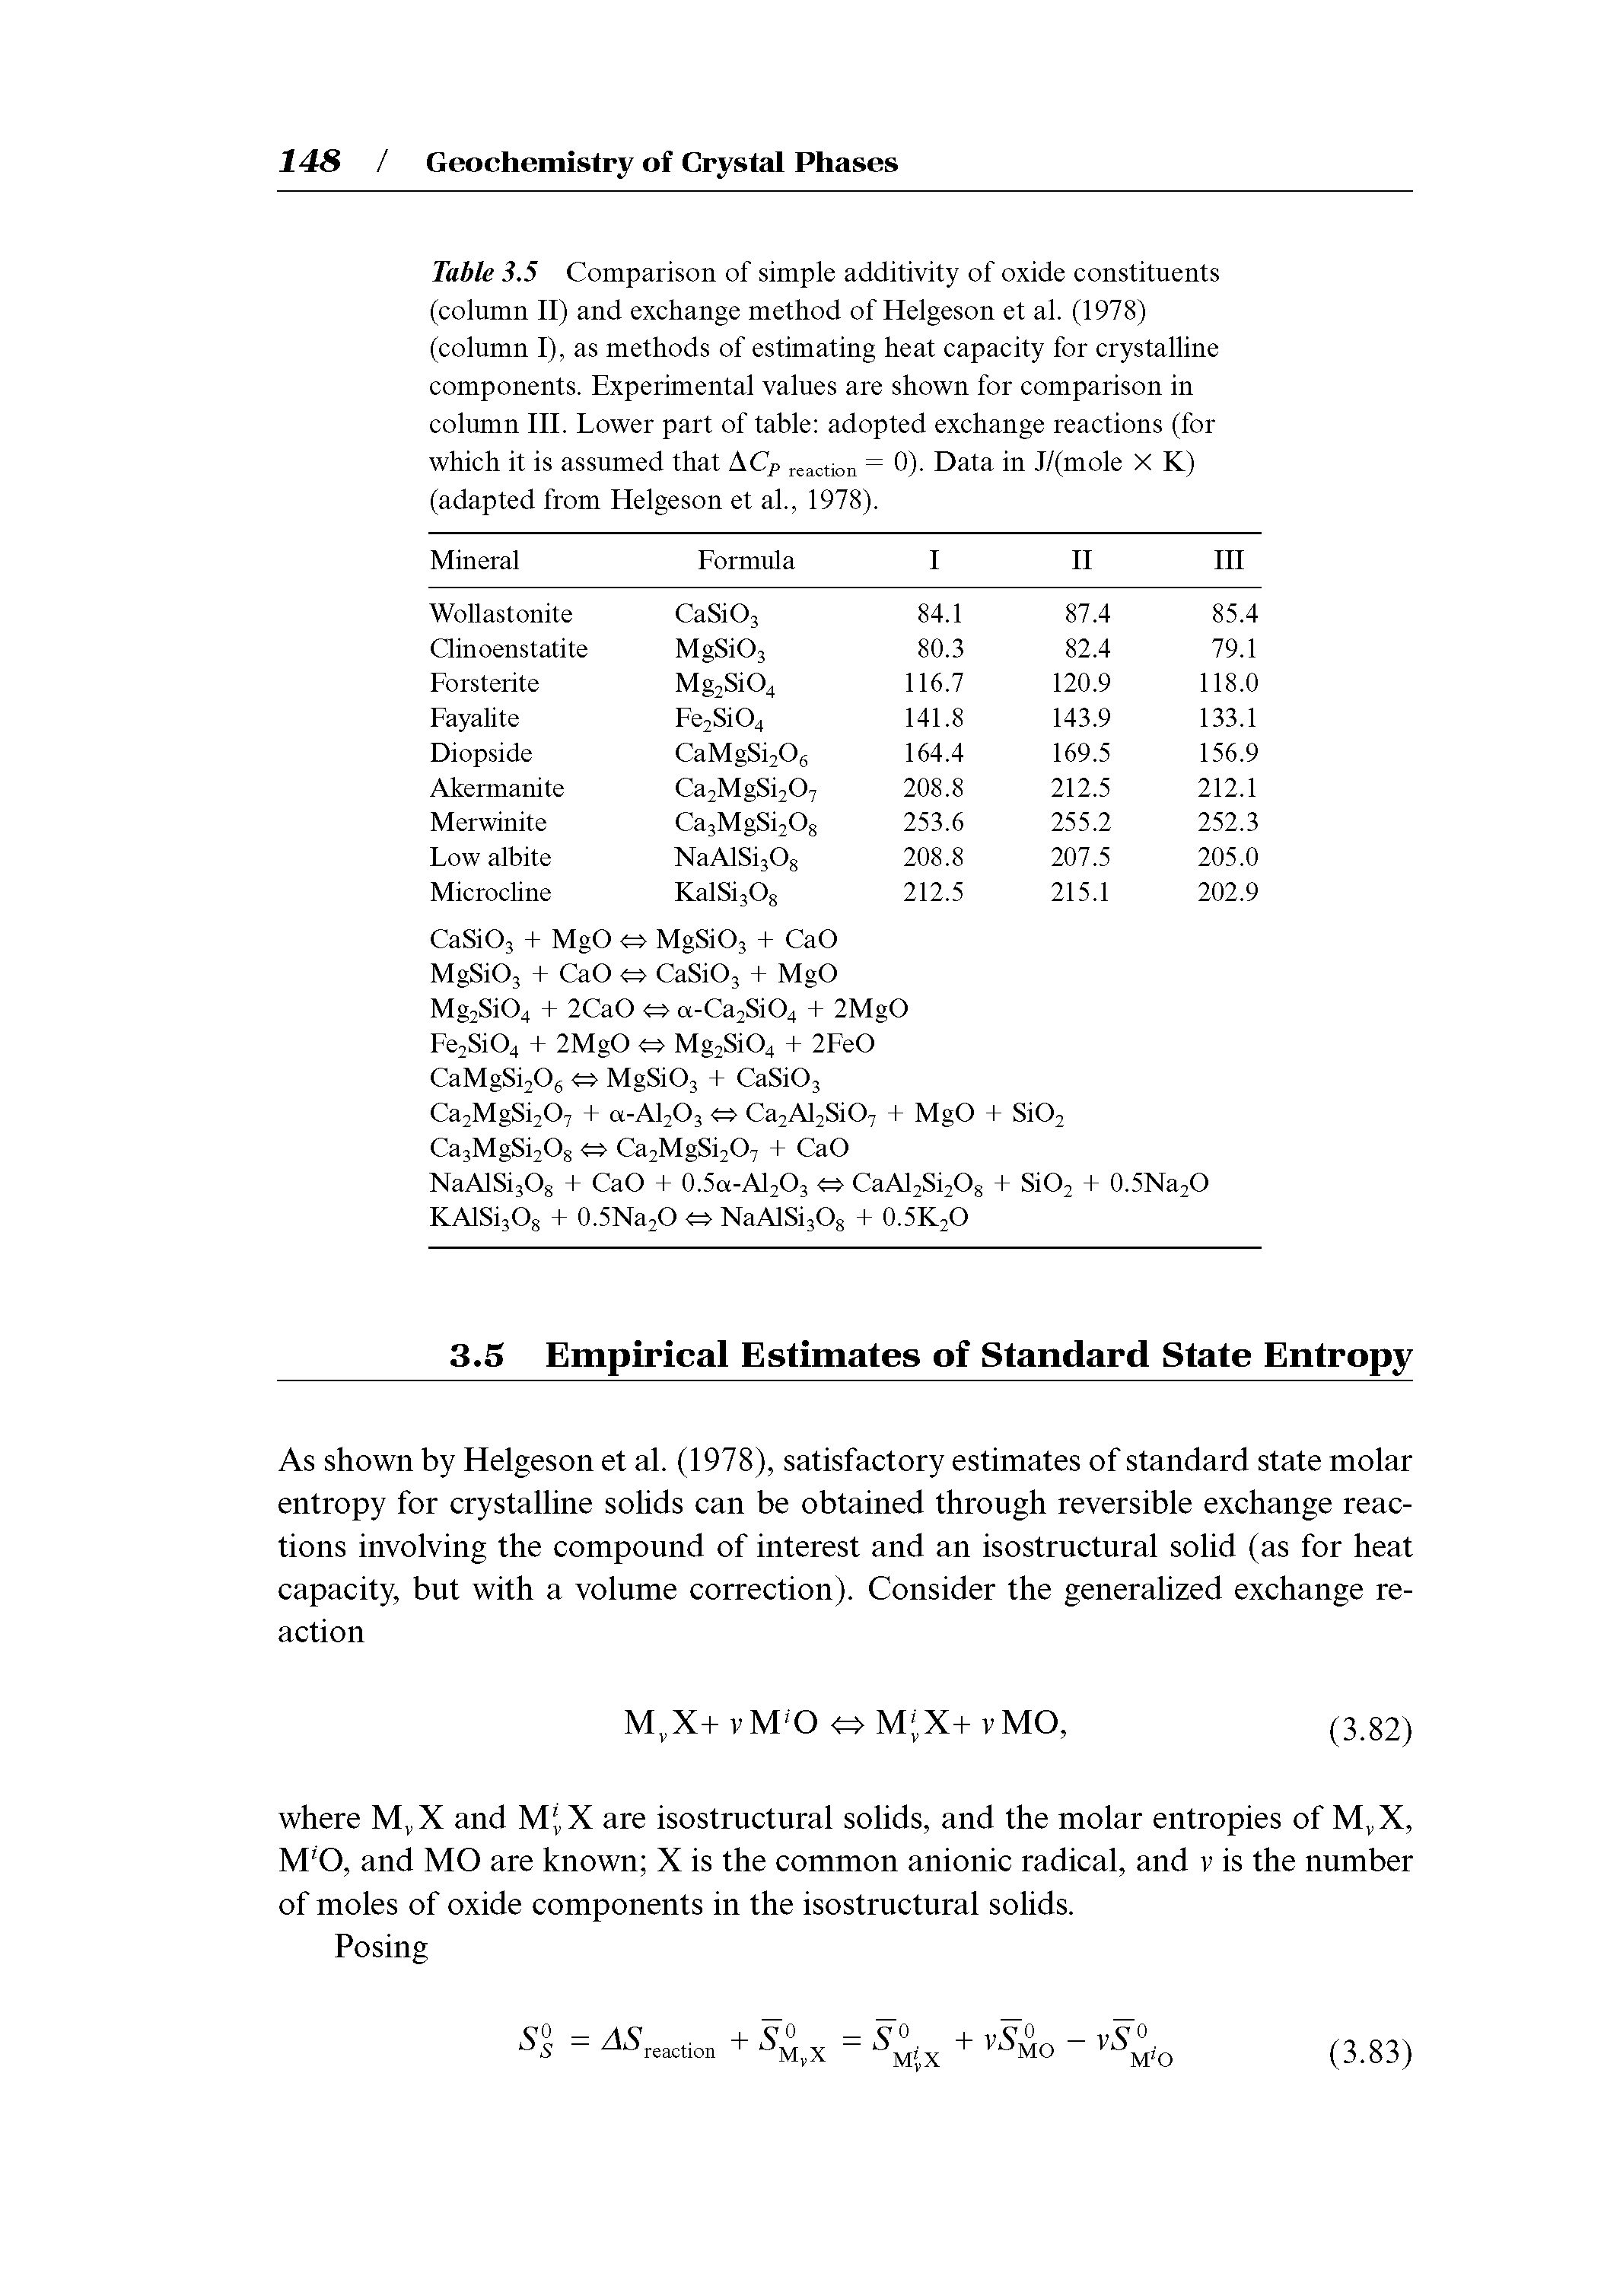 Table 3.5 Comparison of simple additivity of oxide constituents (column II) and exchange method of Helgeson et al. (1978) (column I), as methods of estimating heat capacity for crystalline components. Experimental values are shown for comparison in column III. Lower part of table adopted exchange reactions (for which it is assumed that ACp reaction = 0). Data in J/(mole X K) (adapted from Helgeson et ah, 1978).